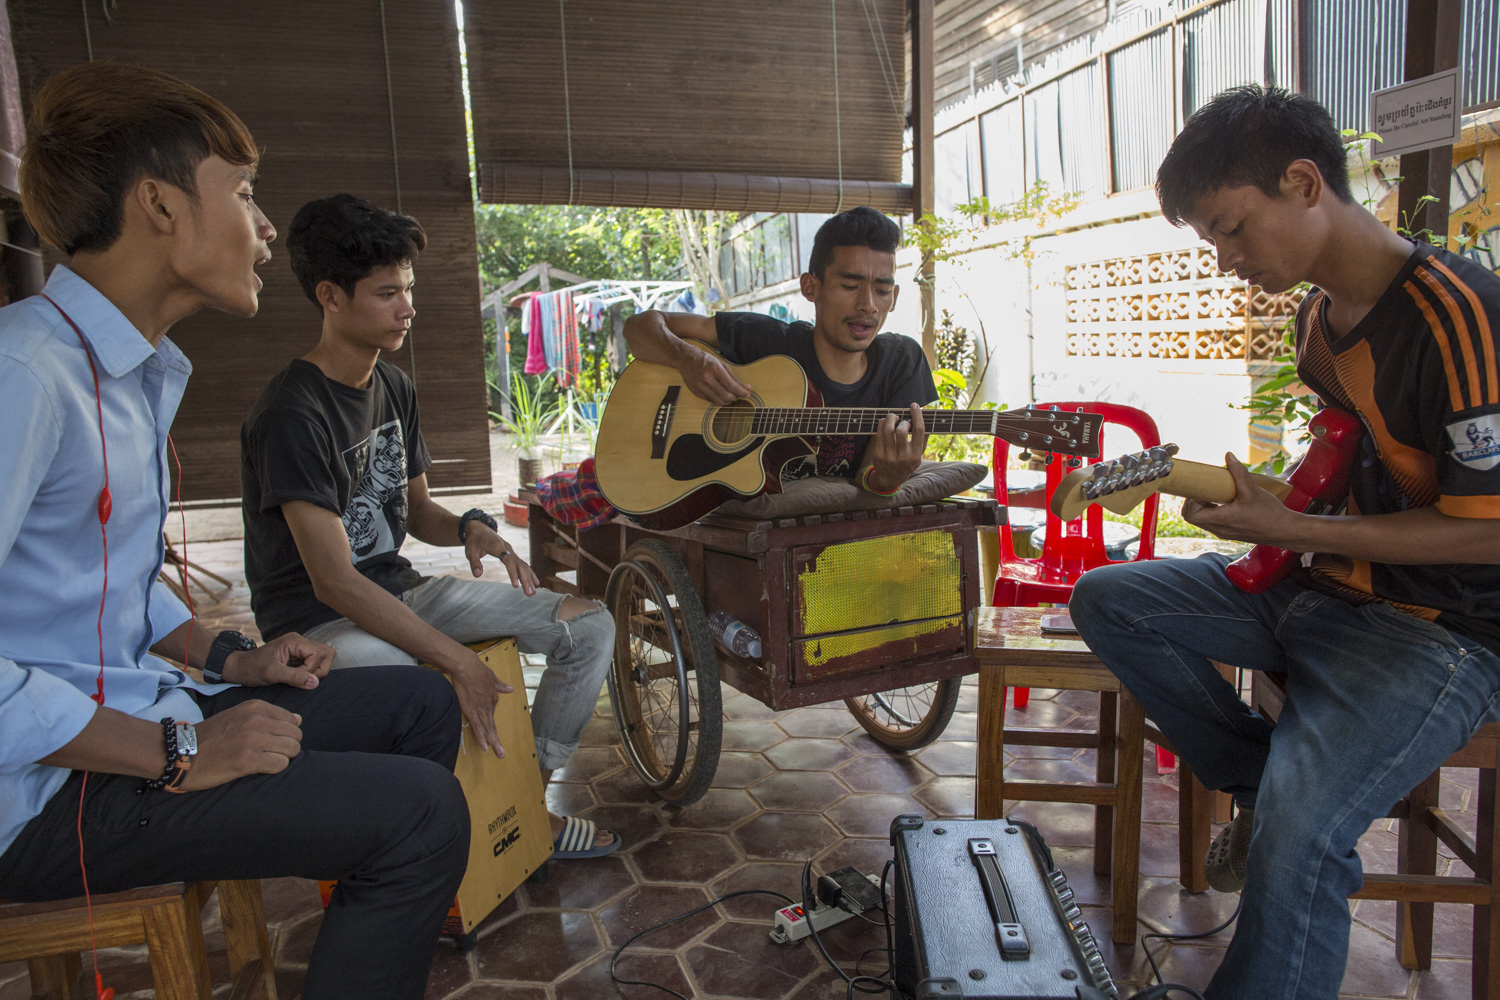 Sophanna rehearsing popular Khmer songs with his band before their performance.